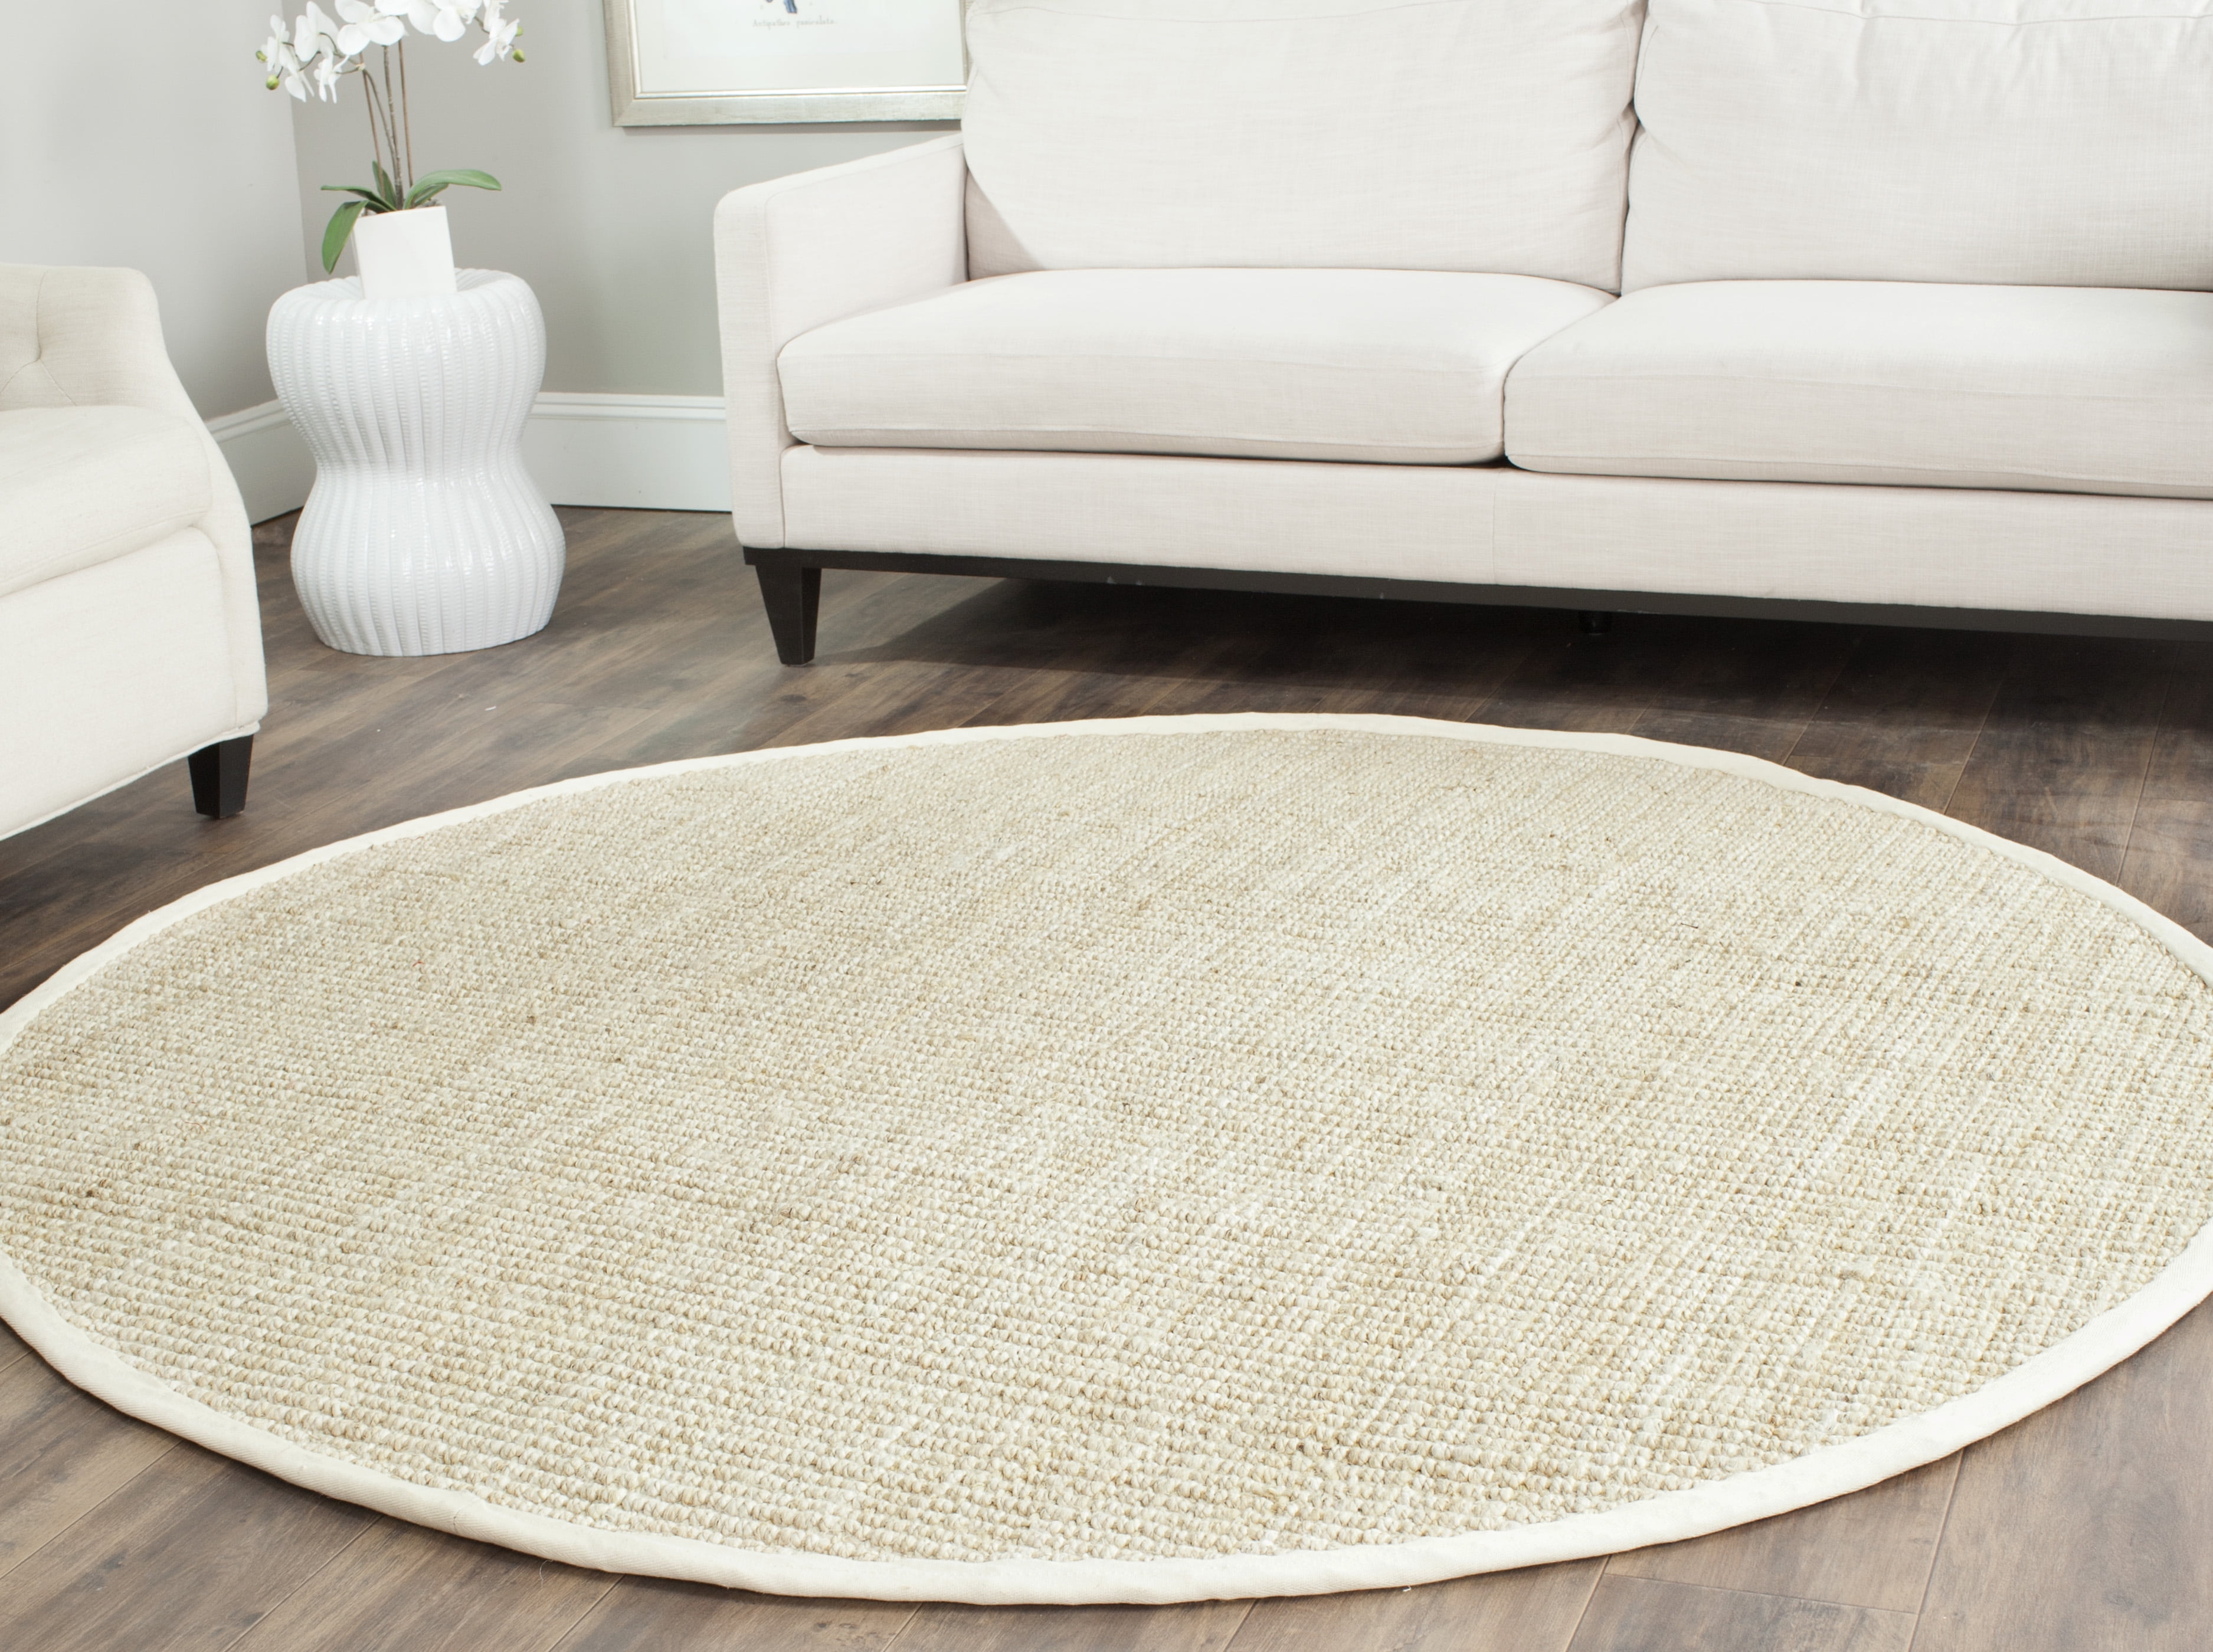 Iguazu Natural Woven Jute Grey Braided Rug Runner 2 Sizes **FREE DELIVERY** 